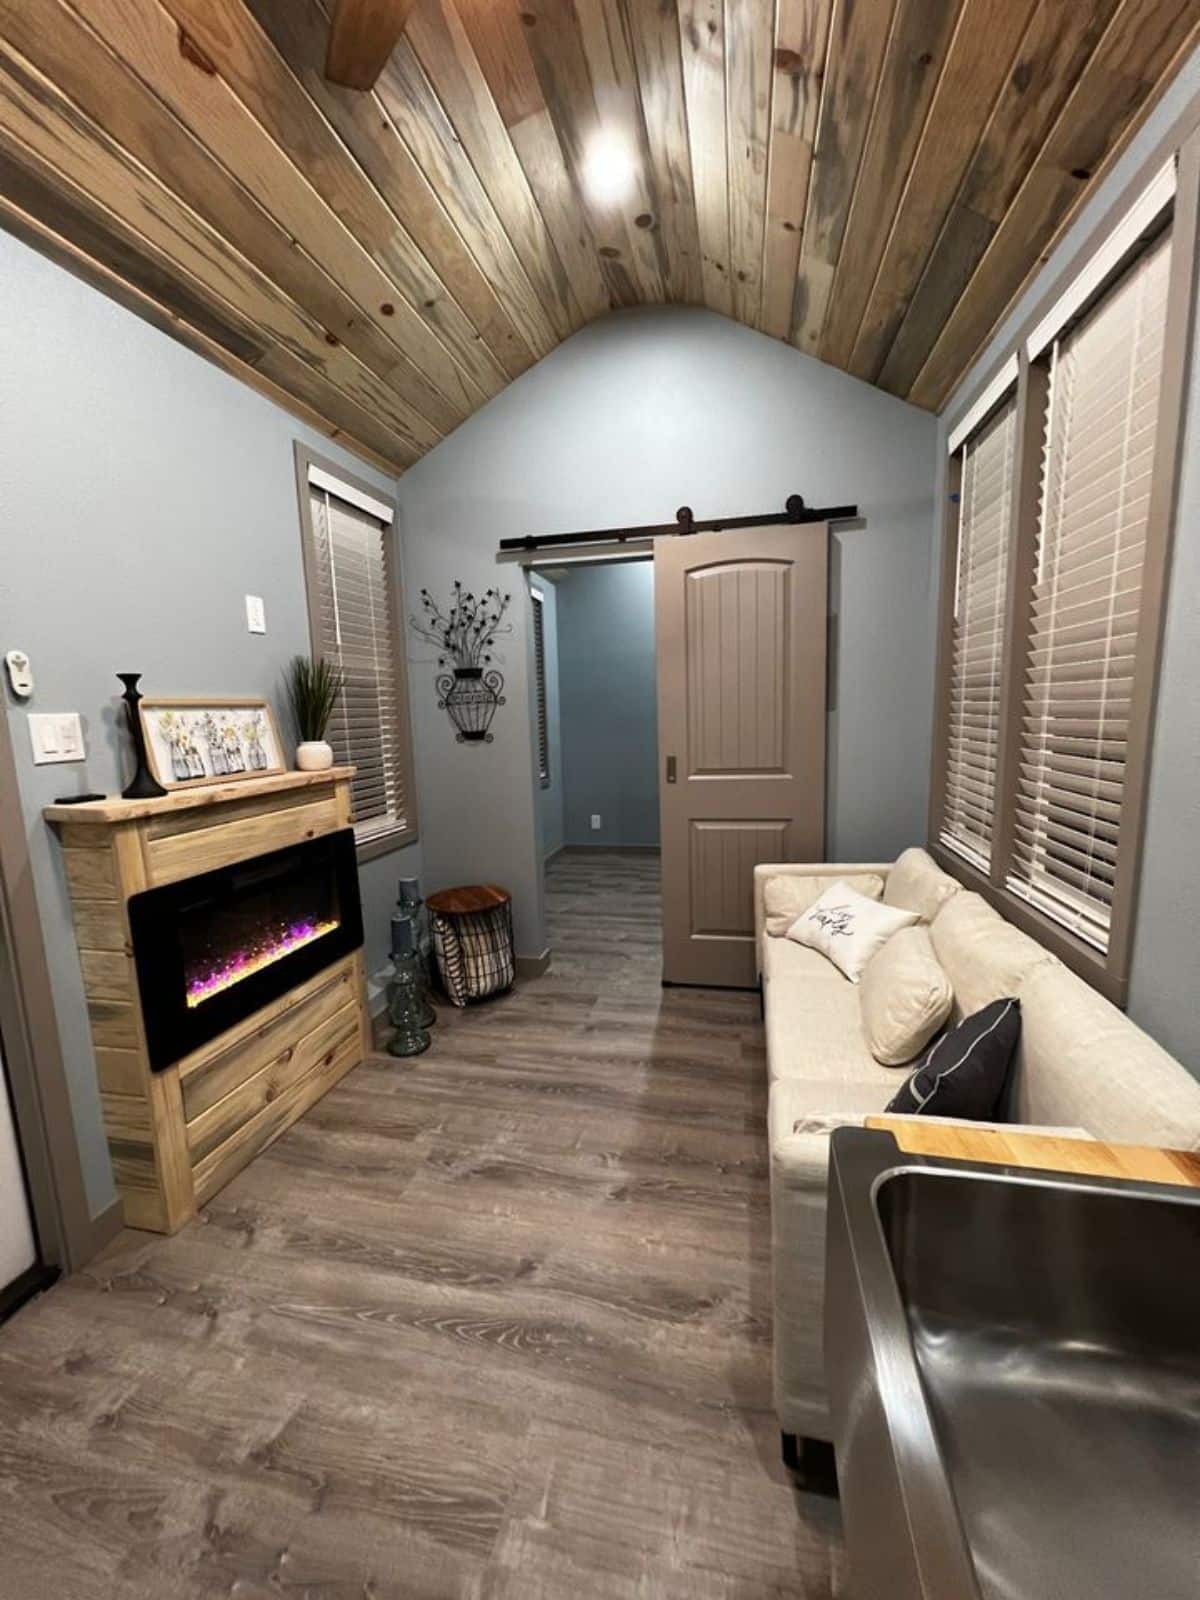 living area of tiny home with downstairs bedroom